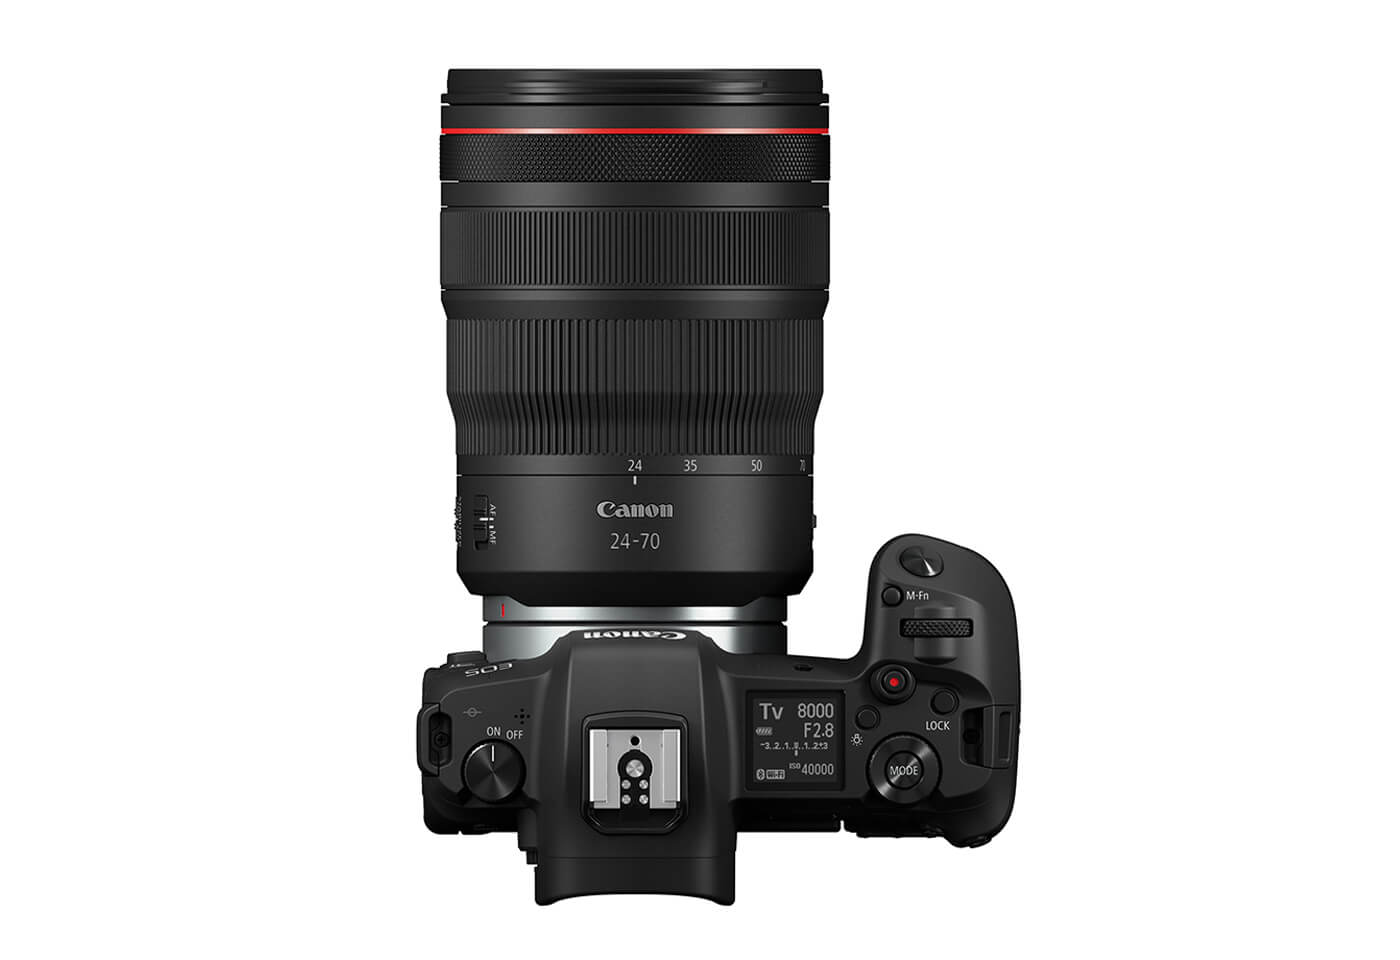 Product image for RF 24-70m F2.8 L IS USM